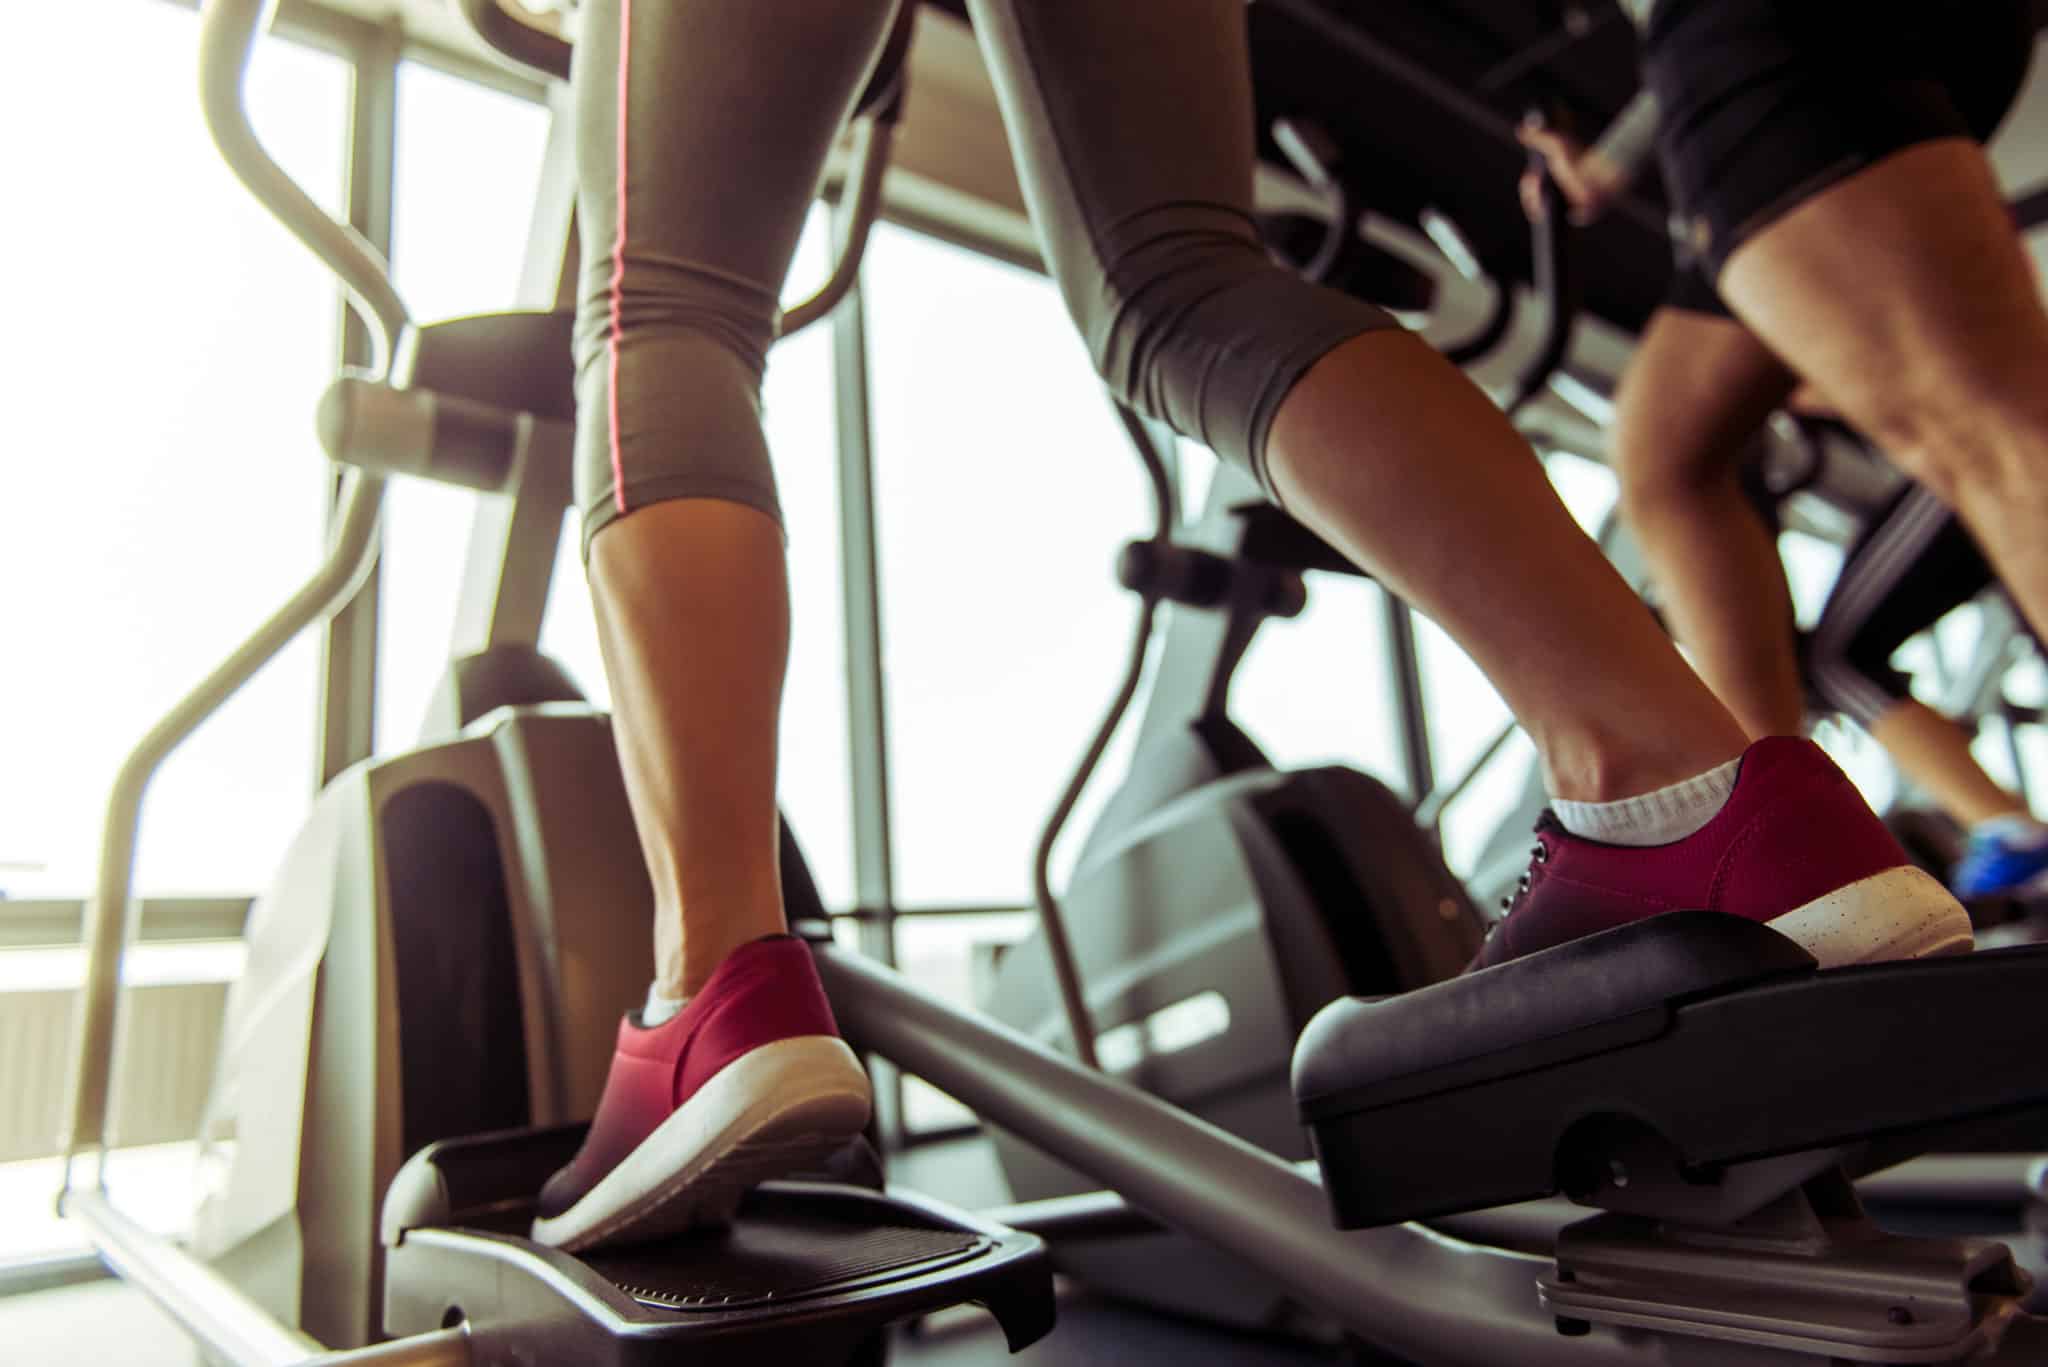 Try these intense interval-style elliptical workouts to boost your weight loss.